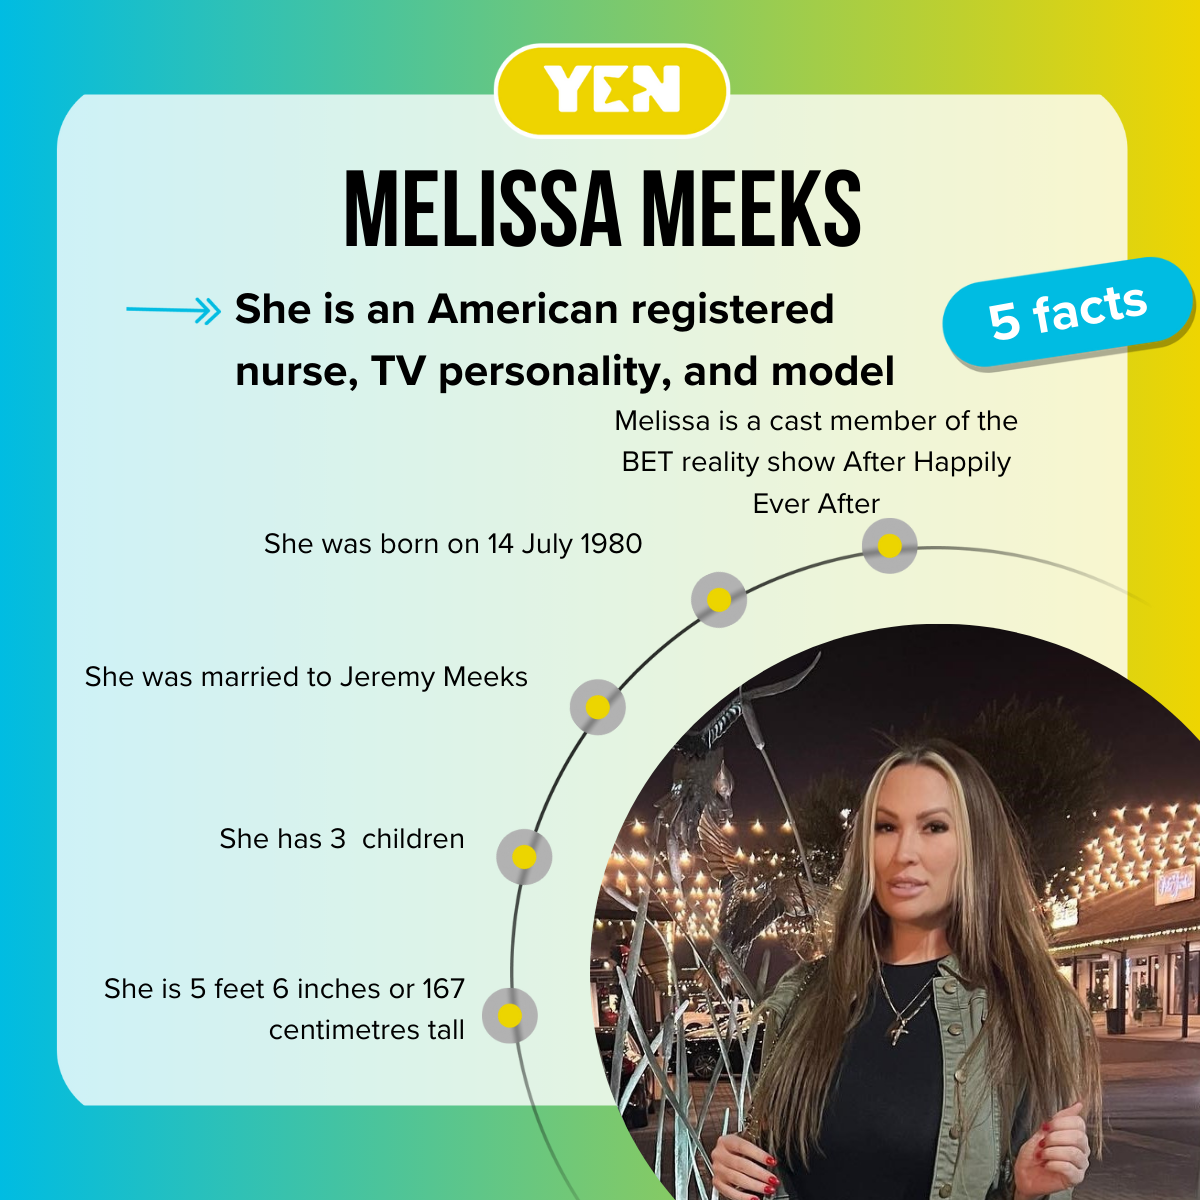 Facts about Melissa Meeks